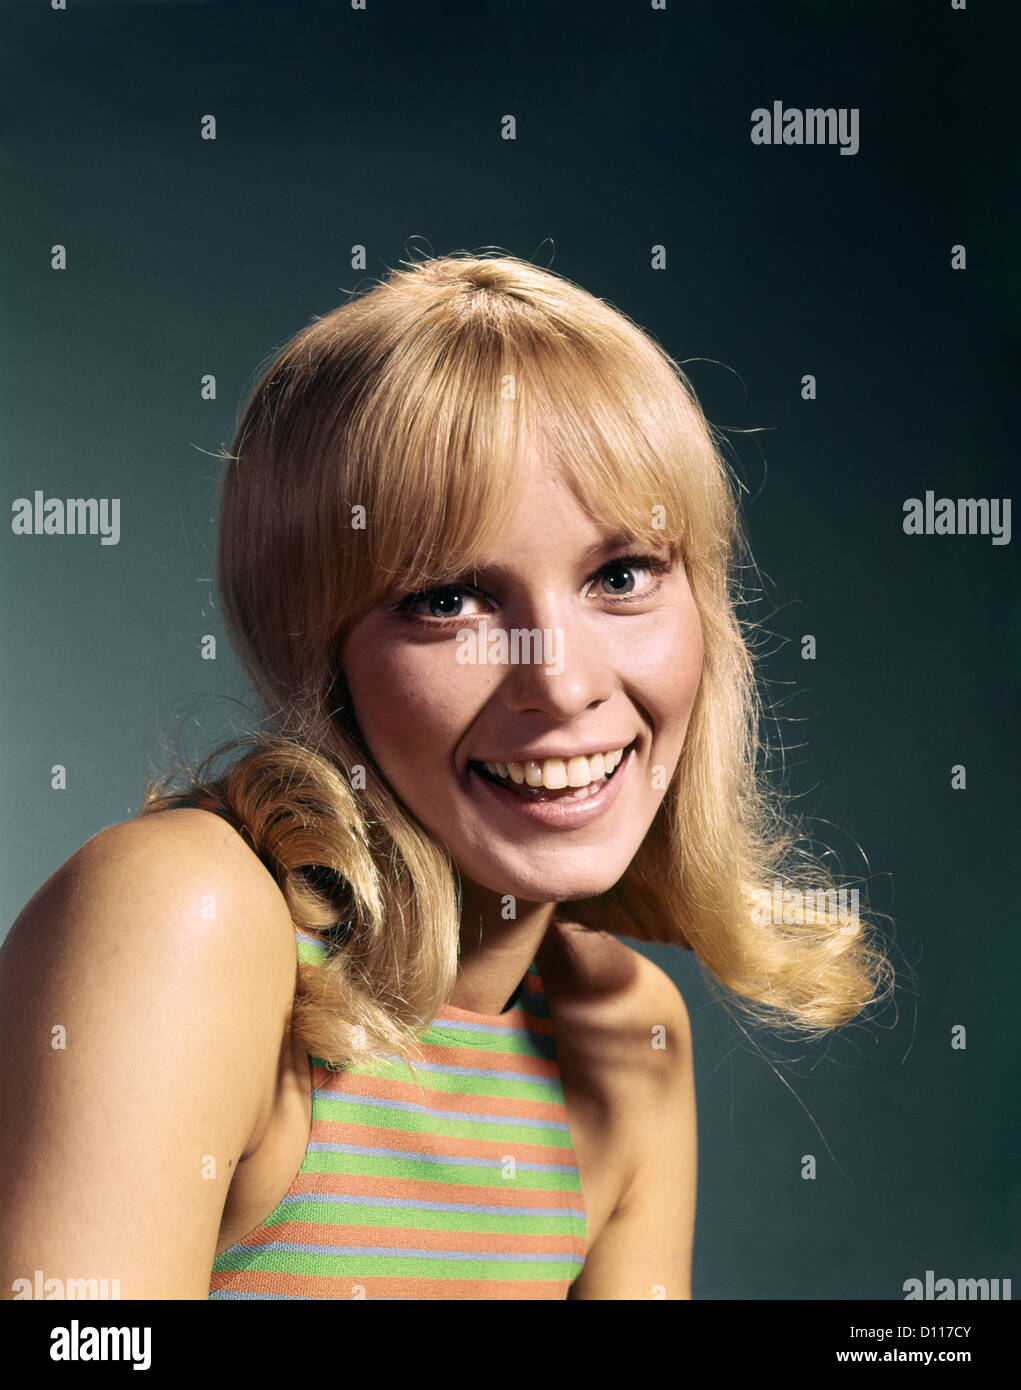 1960s PORTRAIT OF YOUNG BLOND WOMAN SMILING WEARING STRIPED SLEEVELESS TOP Stock Photo